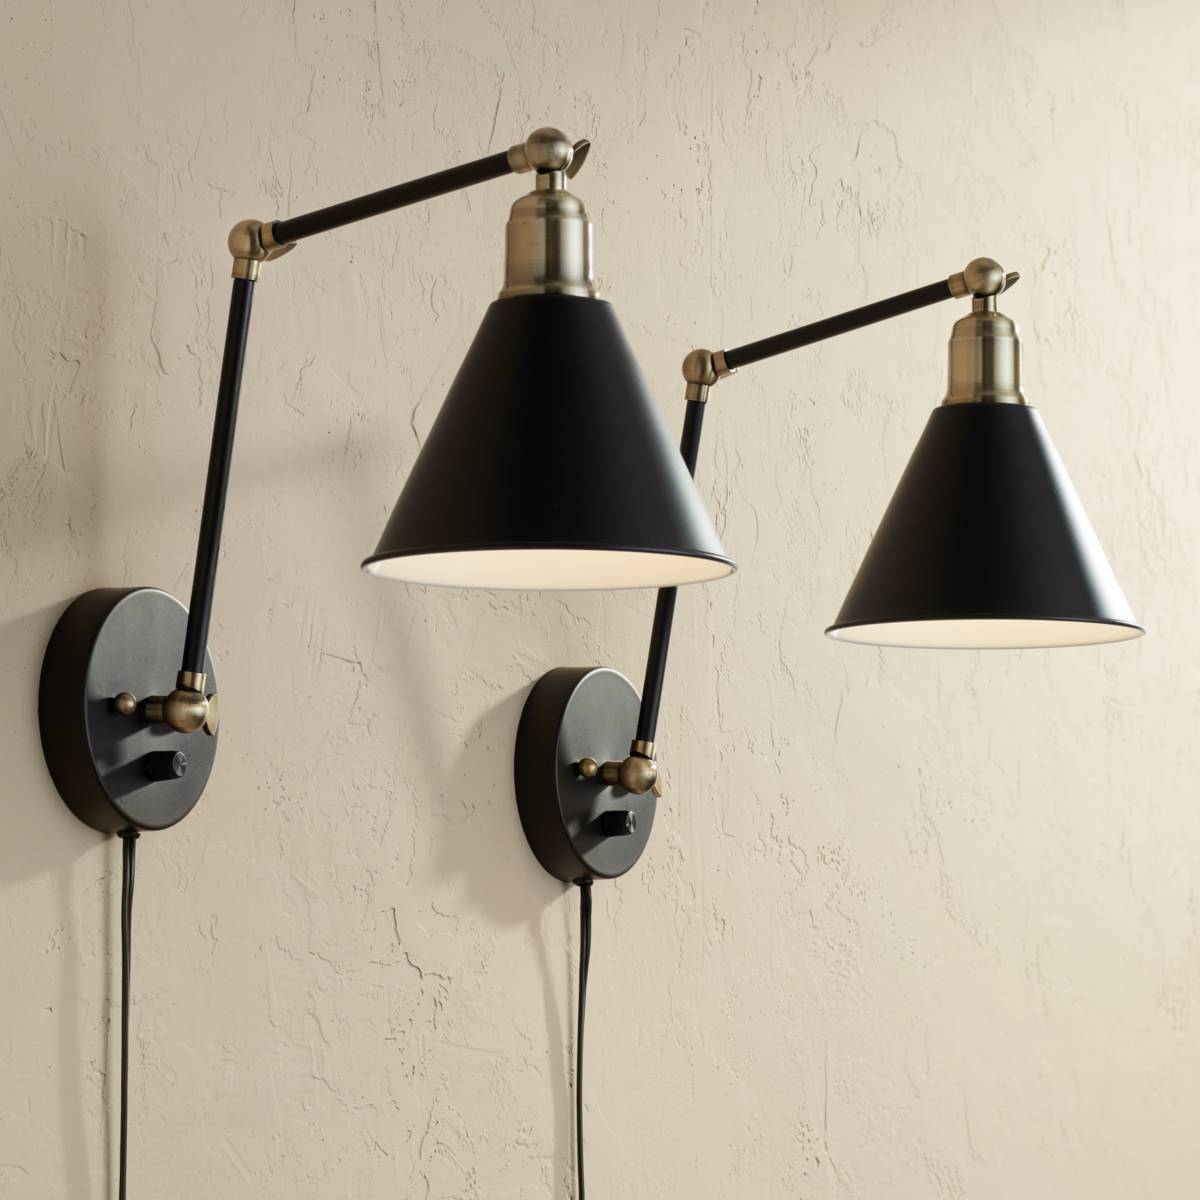 Wall Lamps - Decorative Wall Mounted Lamp Designs | Lamps Plus